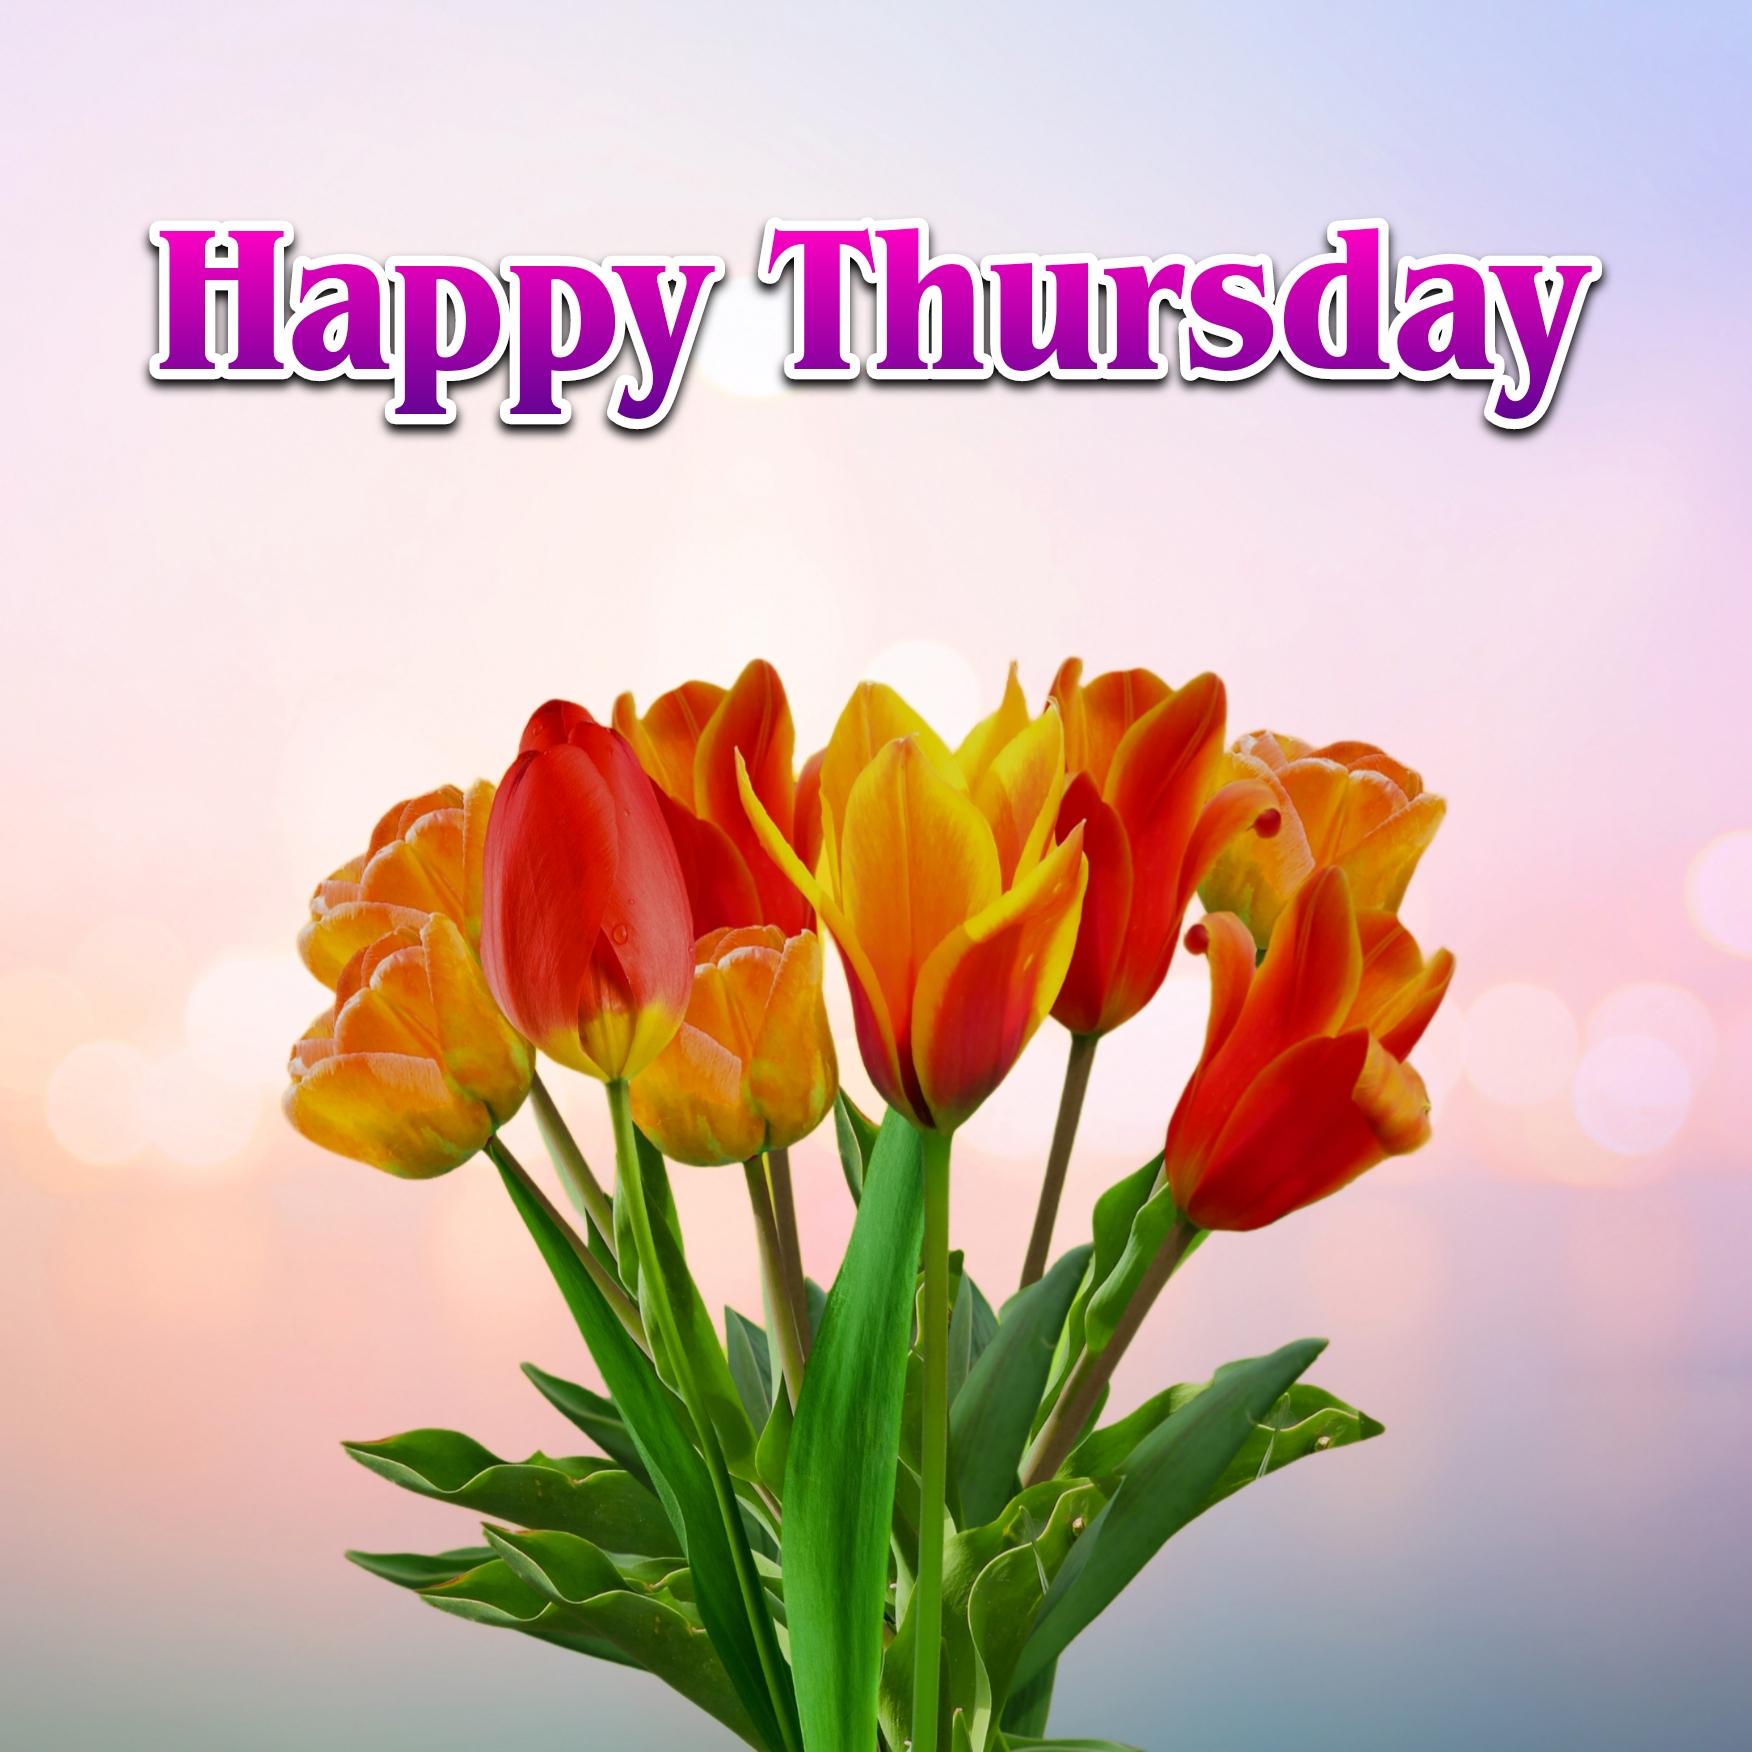 New Happy Thursday Images 2022 HD Download